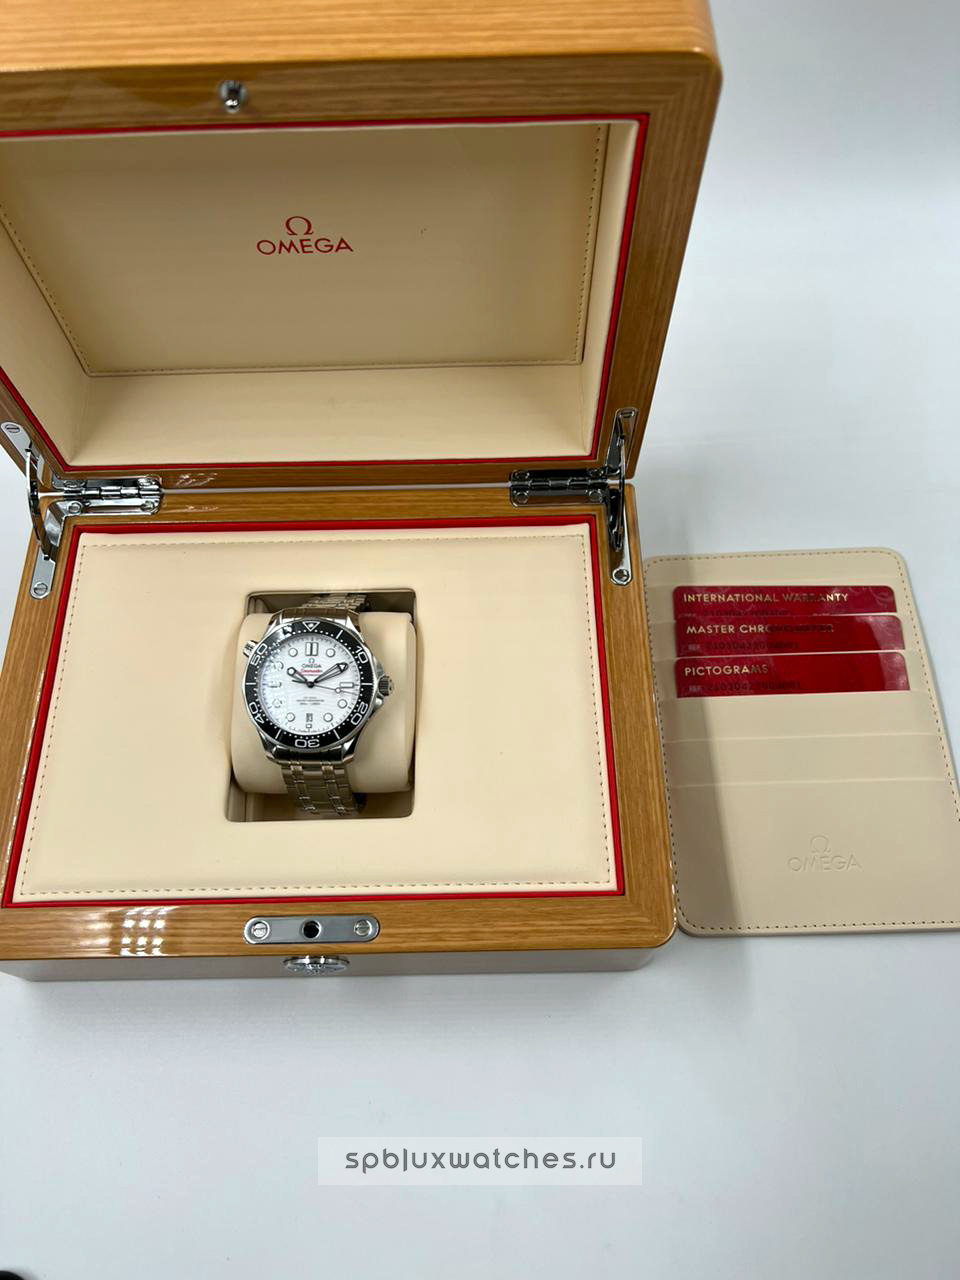 Omega Seamaster Diver 300M Co-Axial Master Chronometer 42 mm 210.30.42.20.04.001